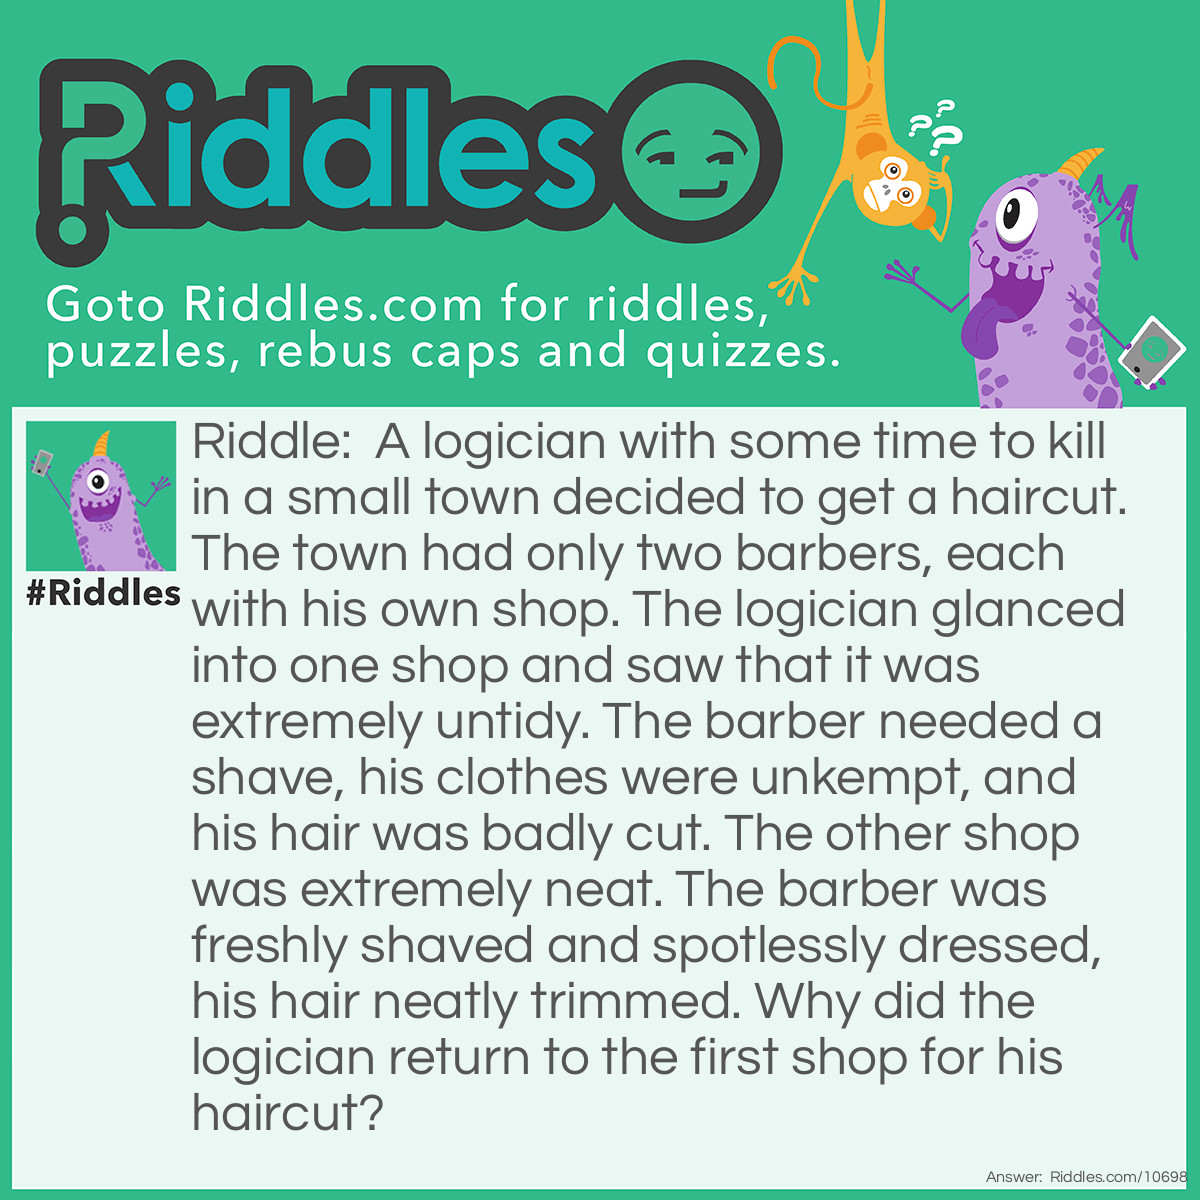 Riddle: A logician with some time to kill in a small town decided to get a haircut. The town had only two barbers, each with his own shop. The logician glanced into one shop and saw that it was extremely untidy. The barber needed a shave, his clothes were unkempt, and his hair was badly cut. The other shop was extremely neat. The barber was freshly shaved and spotlessly dressed, his hair neatly trimmed. Why did the logician return to the first shop for his haircut? Answer: Each barber must have cut the other's hair. The logician picked the barber who had given his rival the better haircut.